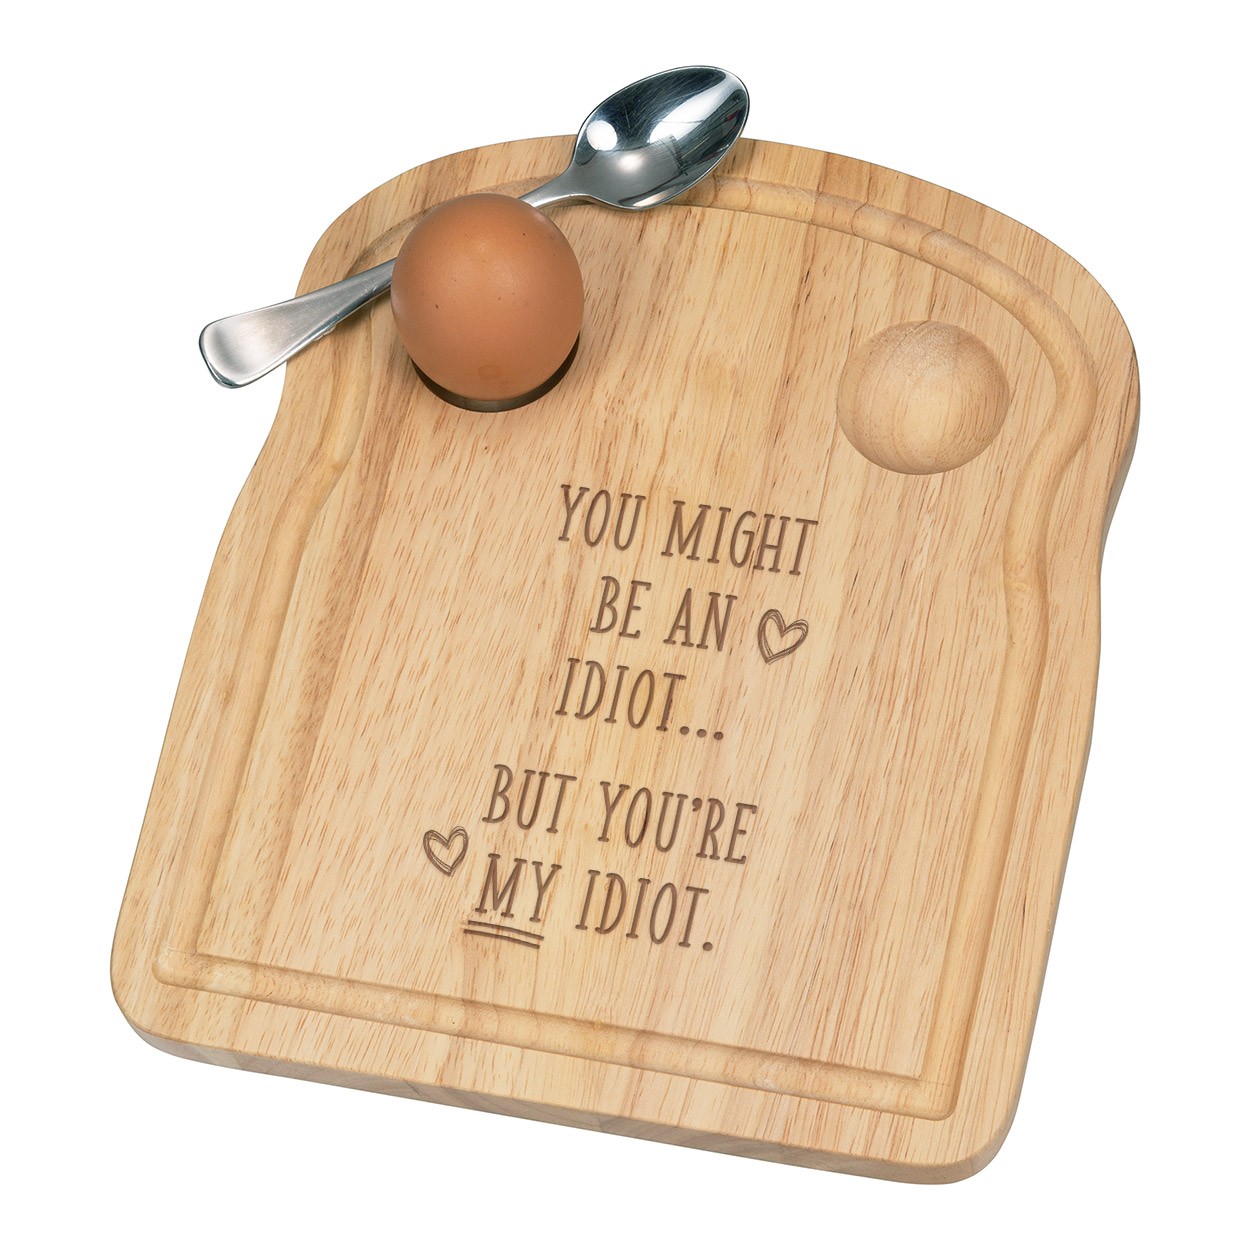 You Might Be An Idiot But You're My Idiot Breakfast Dippy Egg Cup Board Wooden